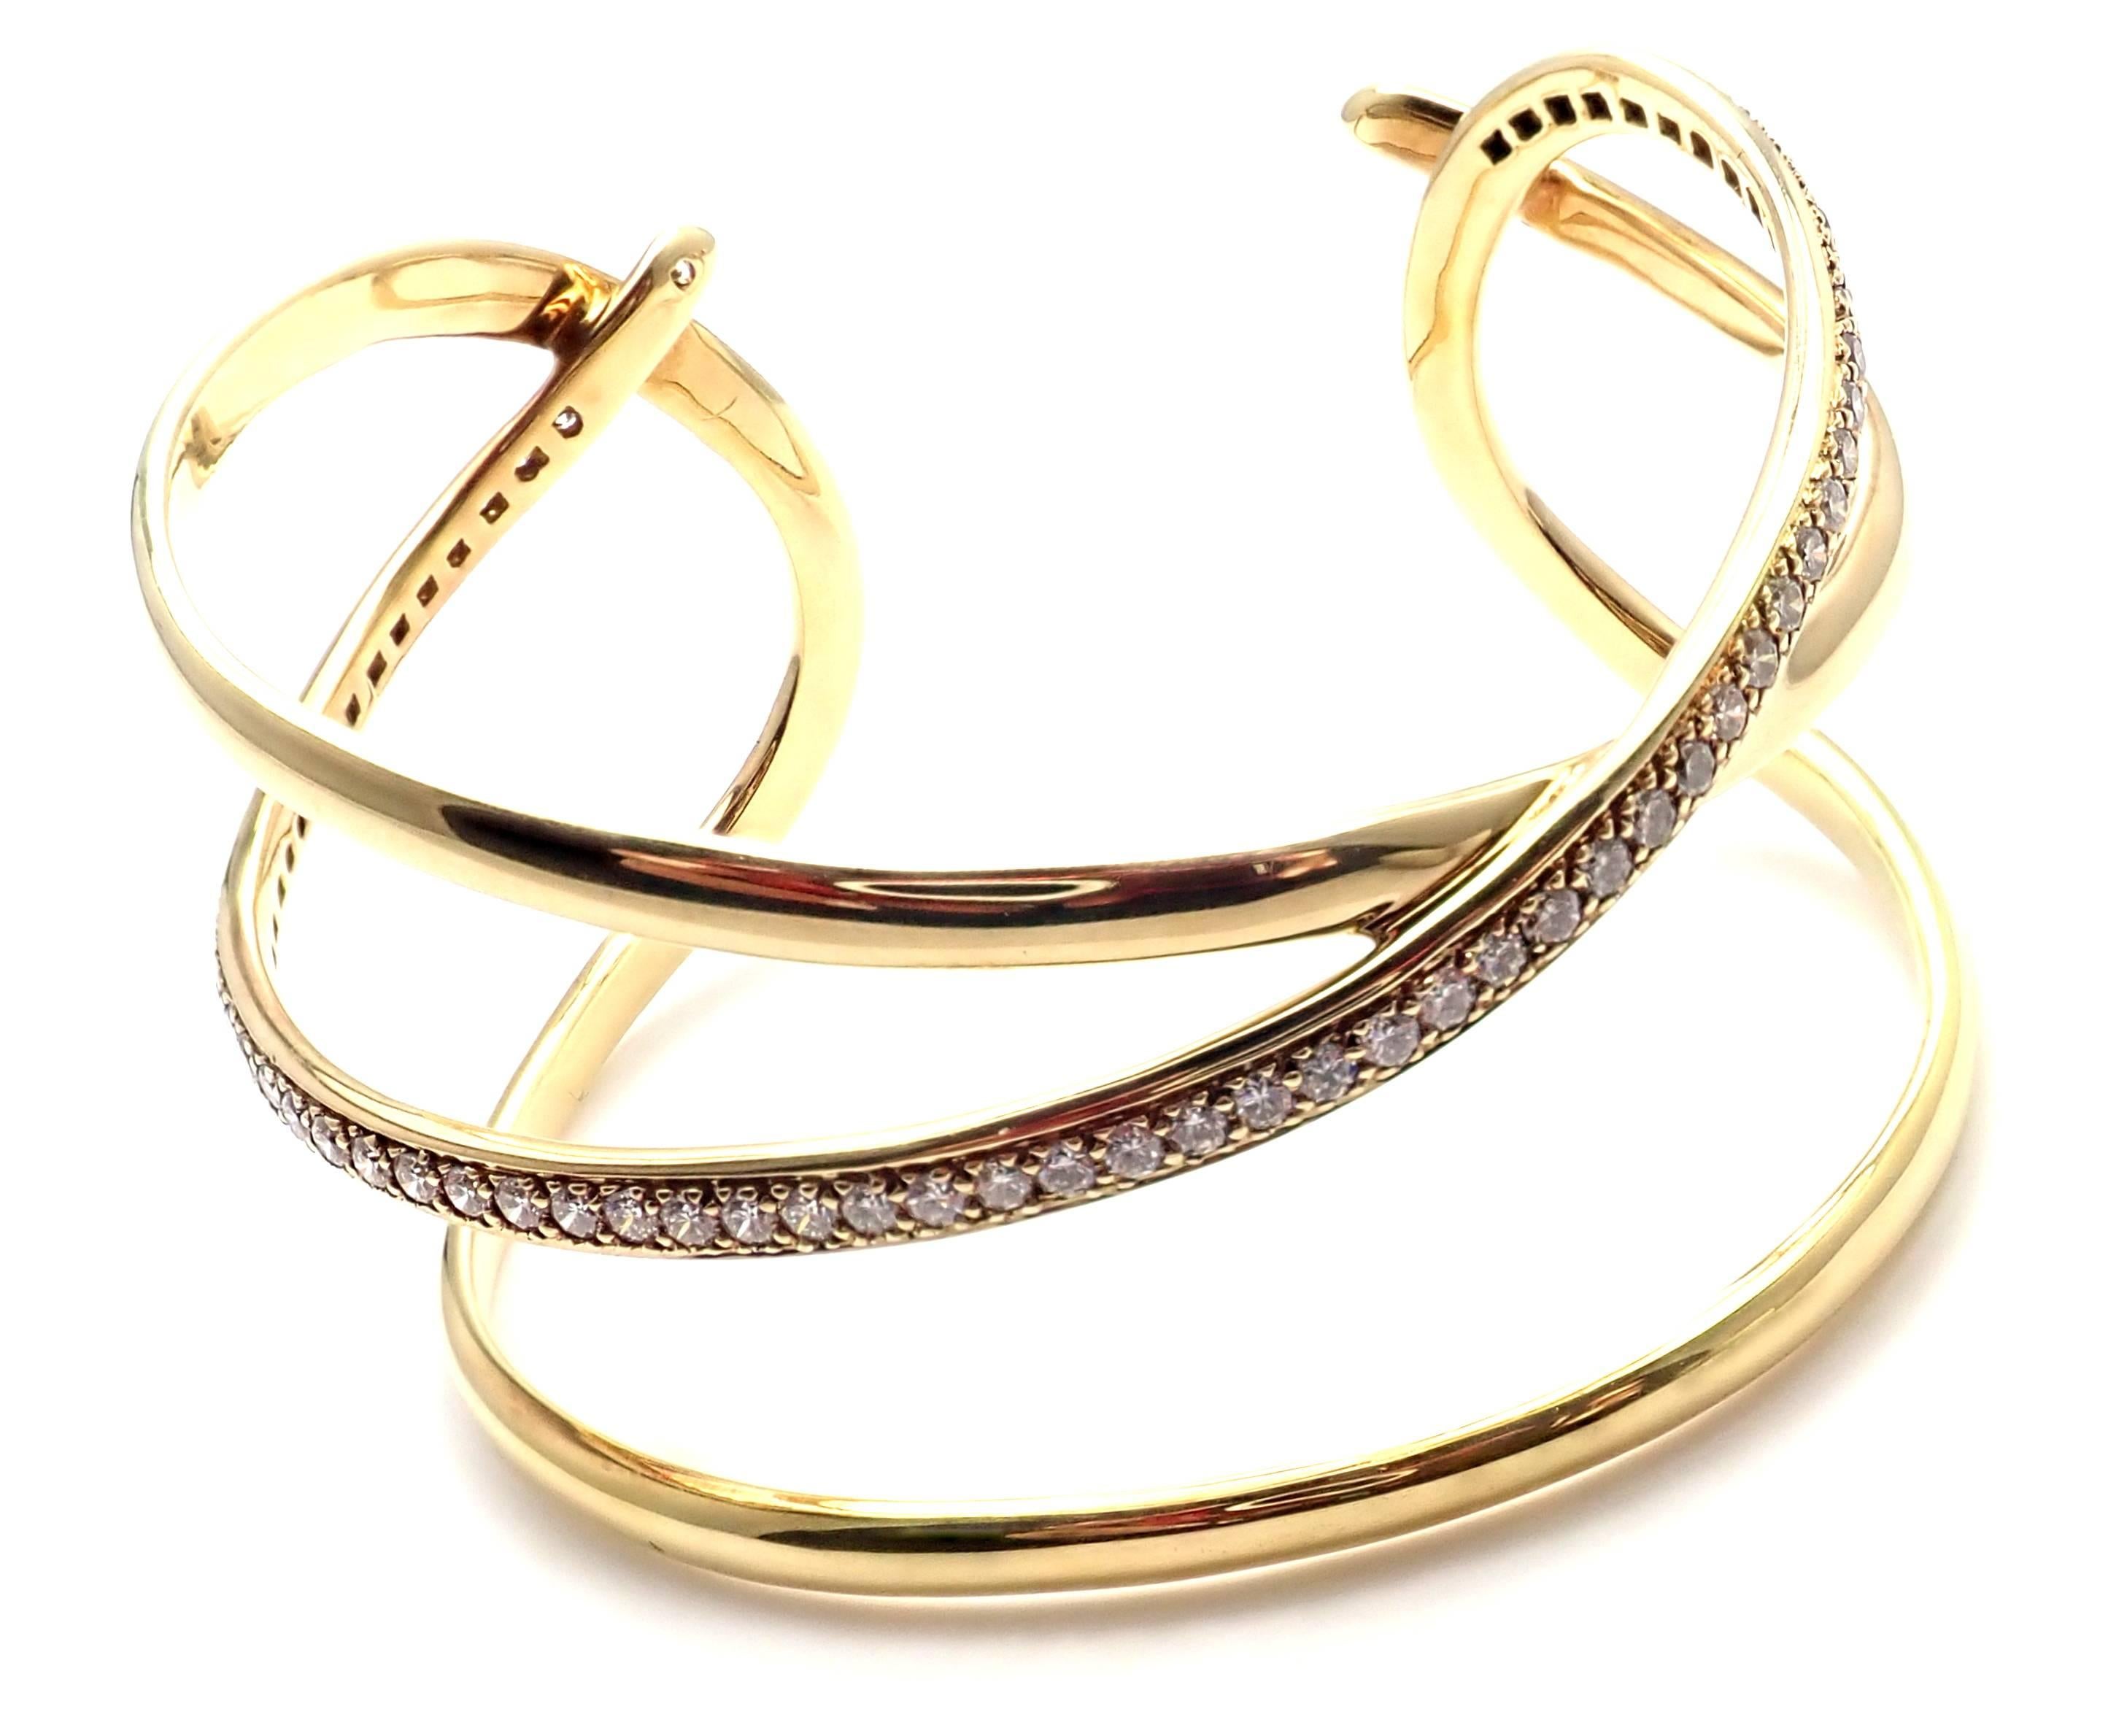 18k Yellow Gold Diamond Bangle Bracelet from Angela Cummings for Tiffany & Co.
Vintage from 1980's.
With 66 round brilliant cut diamonds VS1 clarity, G color Total weight approximately 2ct
Details: 
Weight: 39.6 grams
Length: 6 1/2